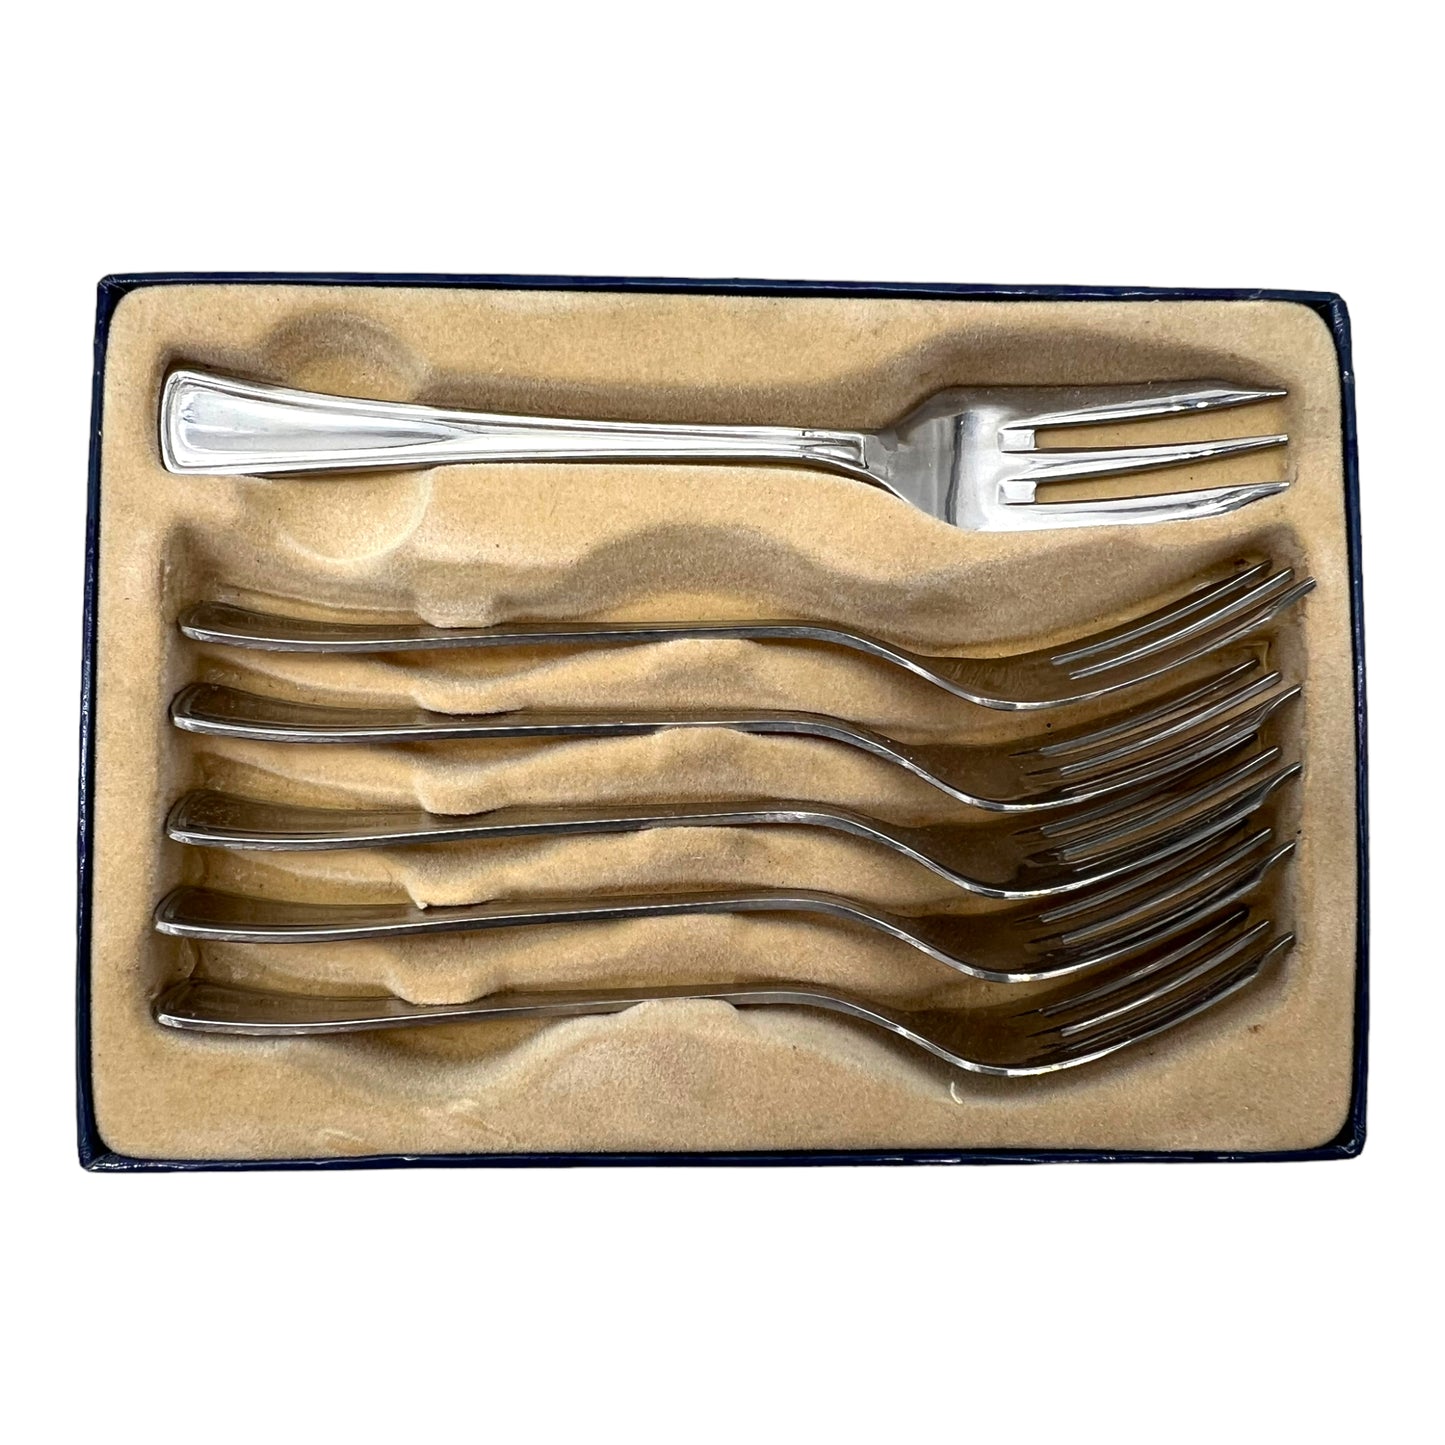 French cake fork set by Guy Degrenne sold by All Things French Store